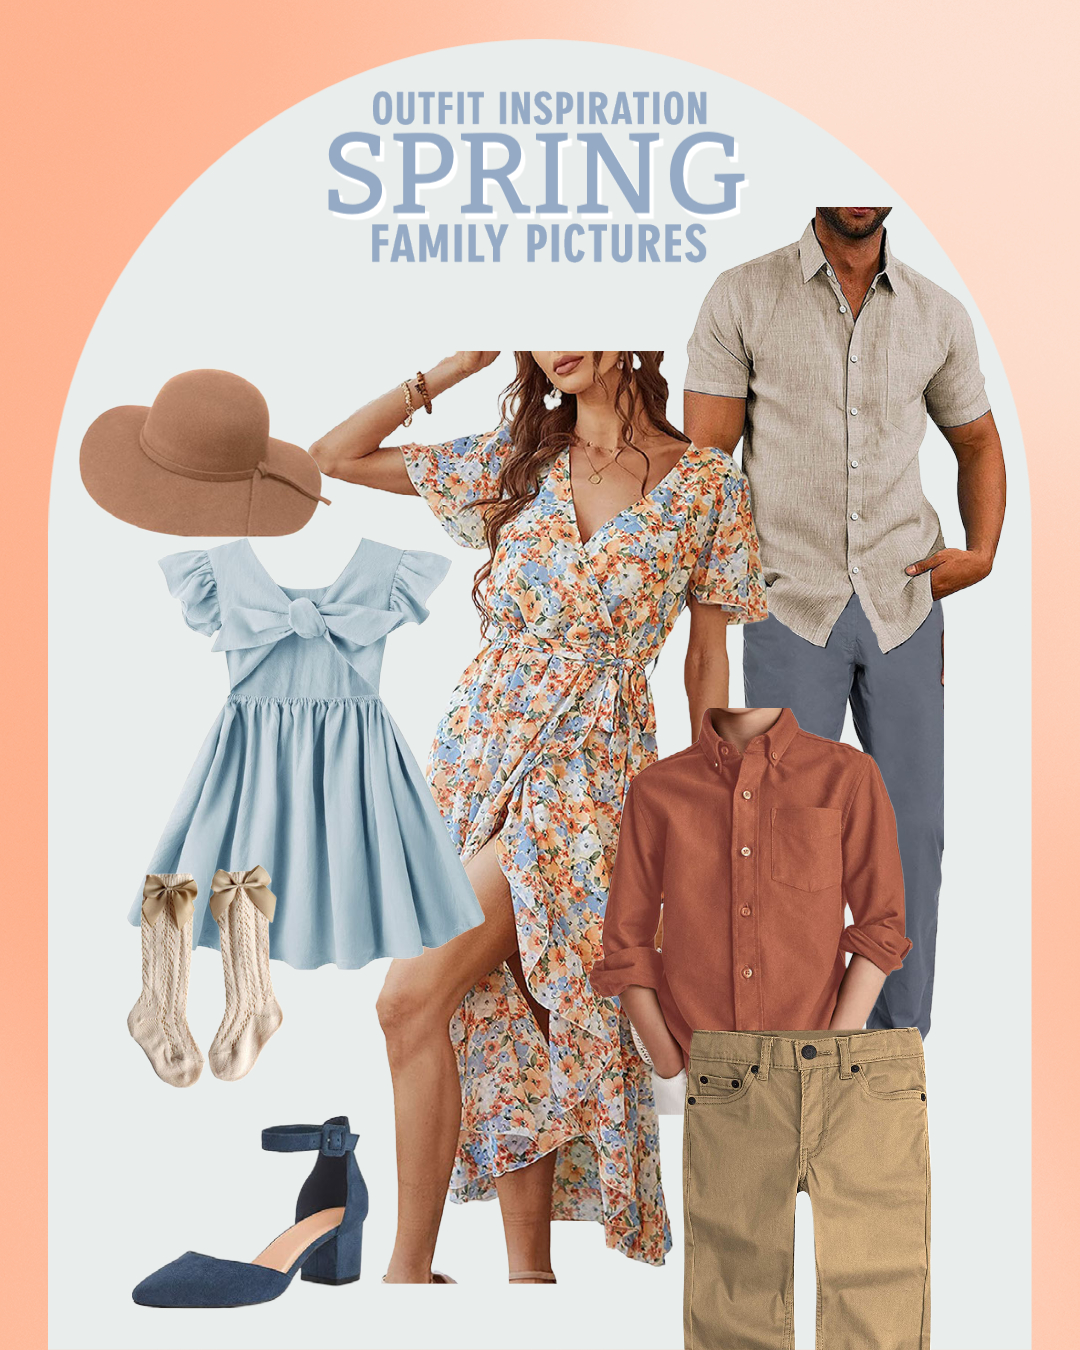 Family Photography Outfit Inspiration for Spring Family Pictures